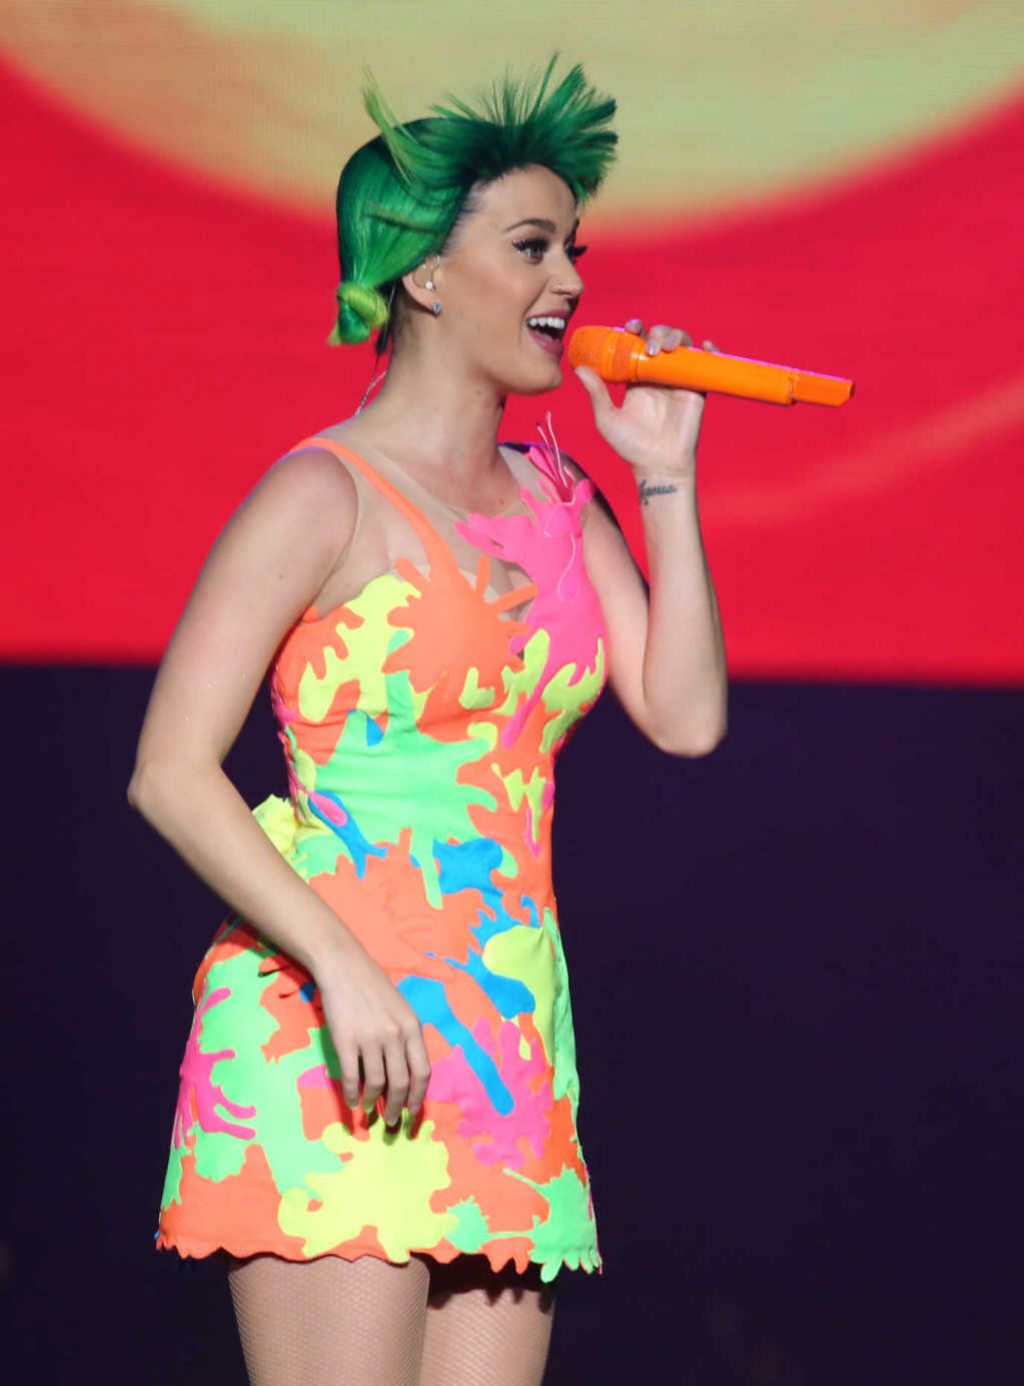 Katy Perry Performs at Prismatic World Tour in Guangzhou - April 2015 ...